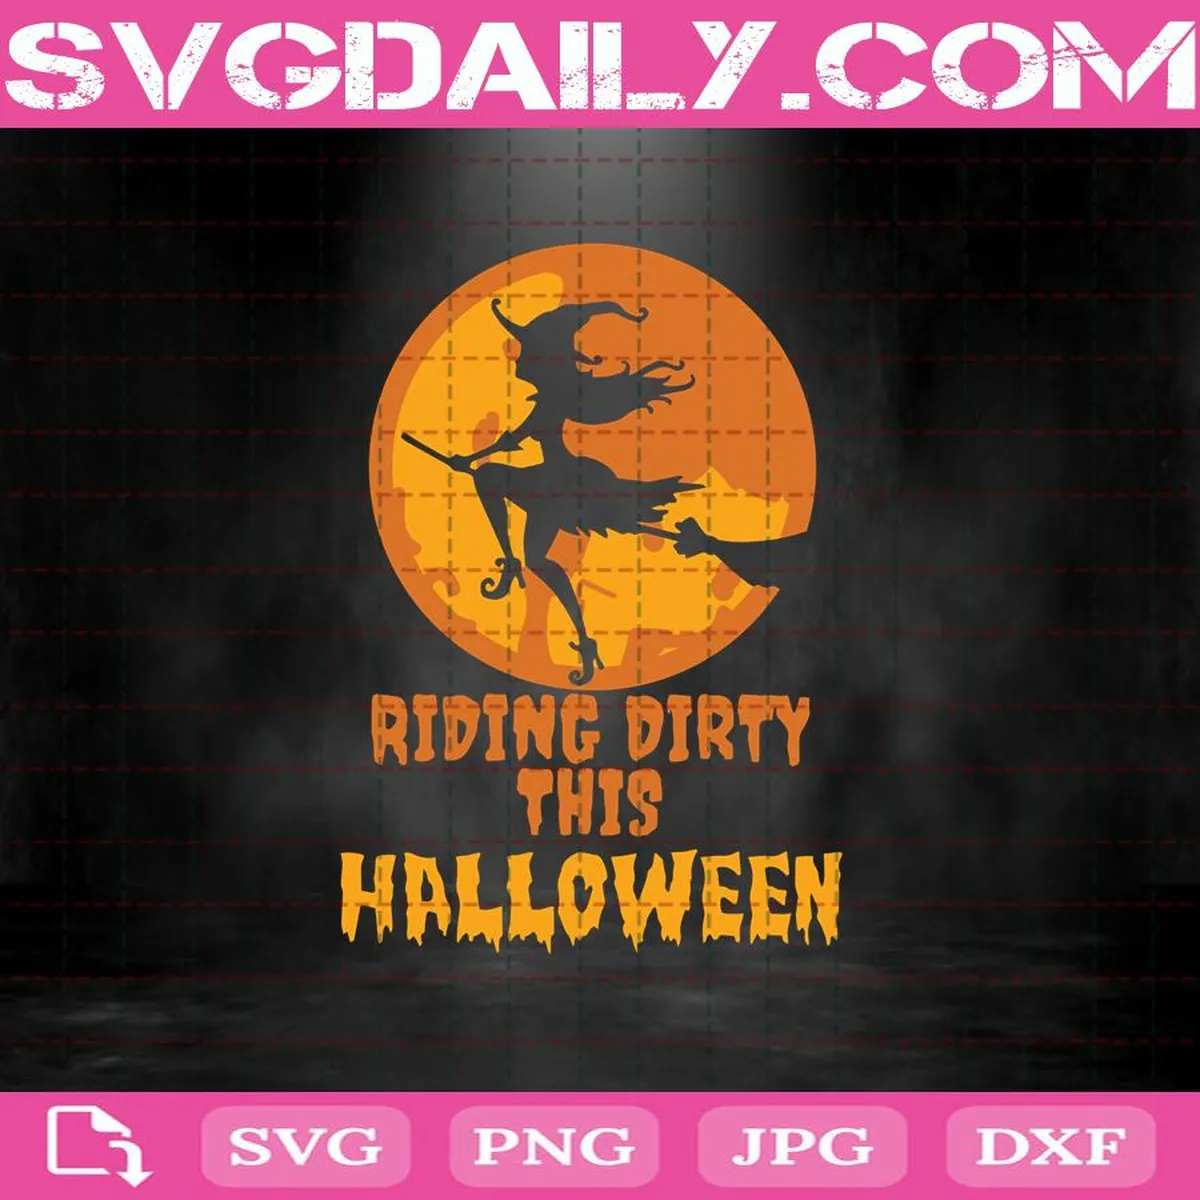 Riding Dirty This Halloween Svg, Witch Svg, Halloween Svg, Happy Halloween Svg, Dirty Svg, Ride Svg, SvgFiles